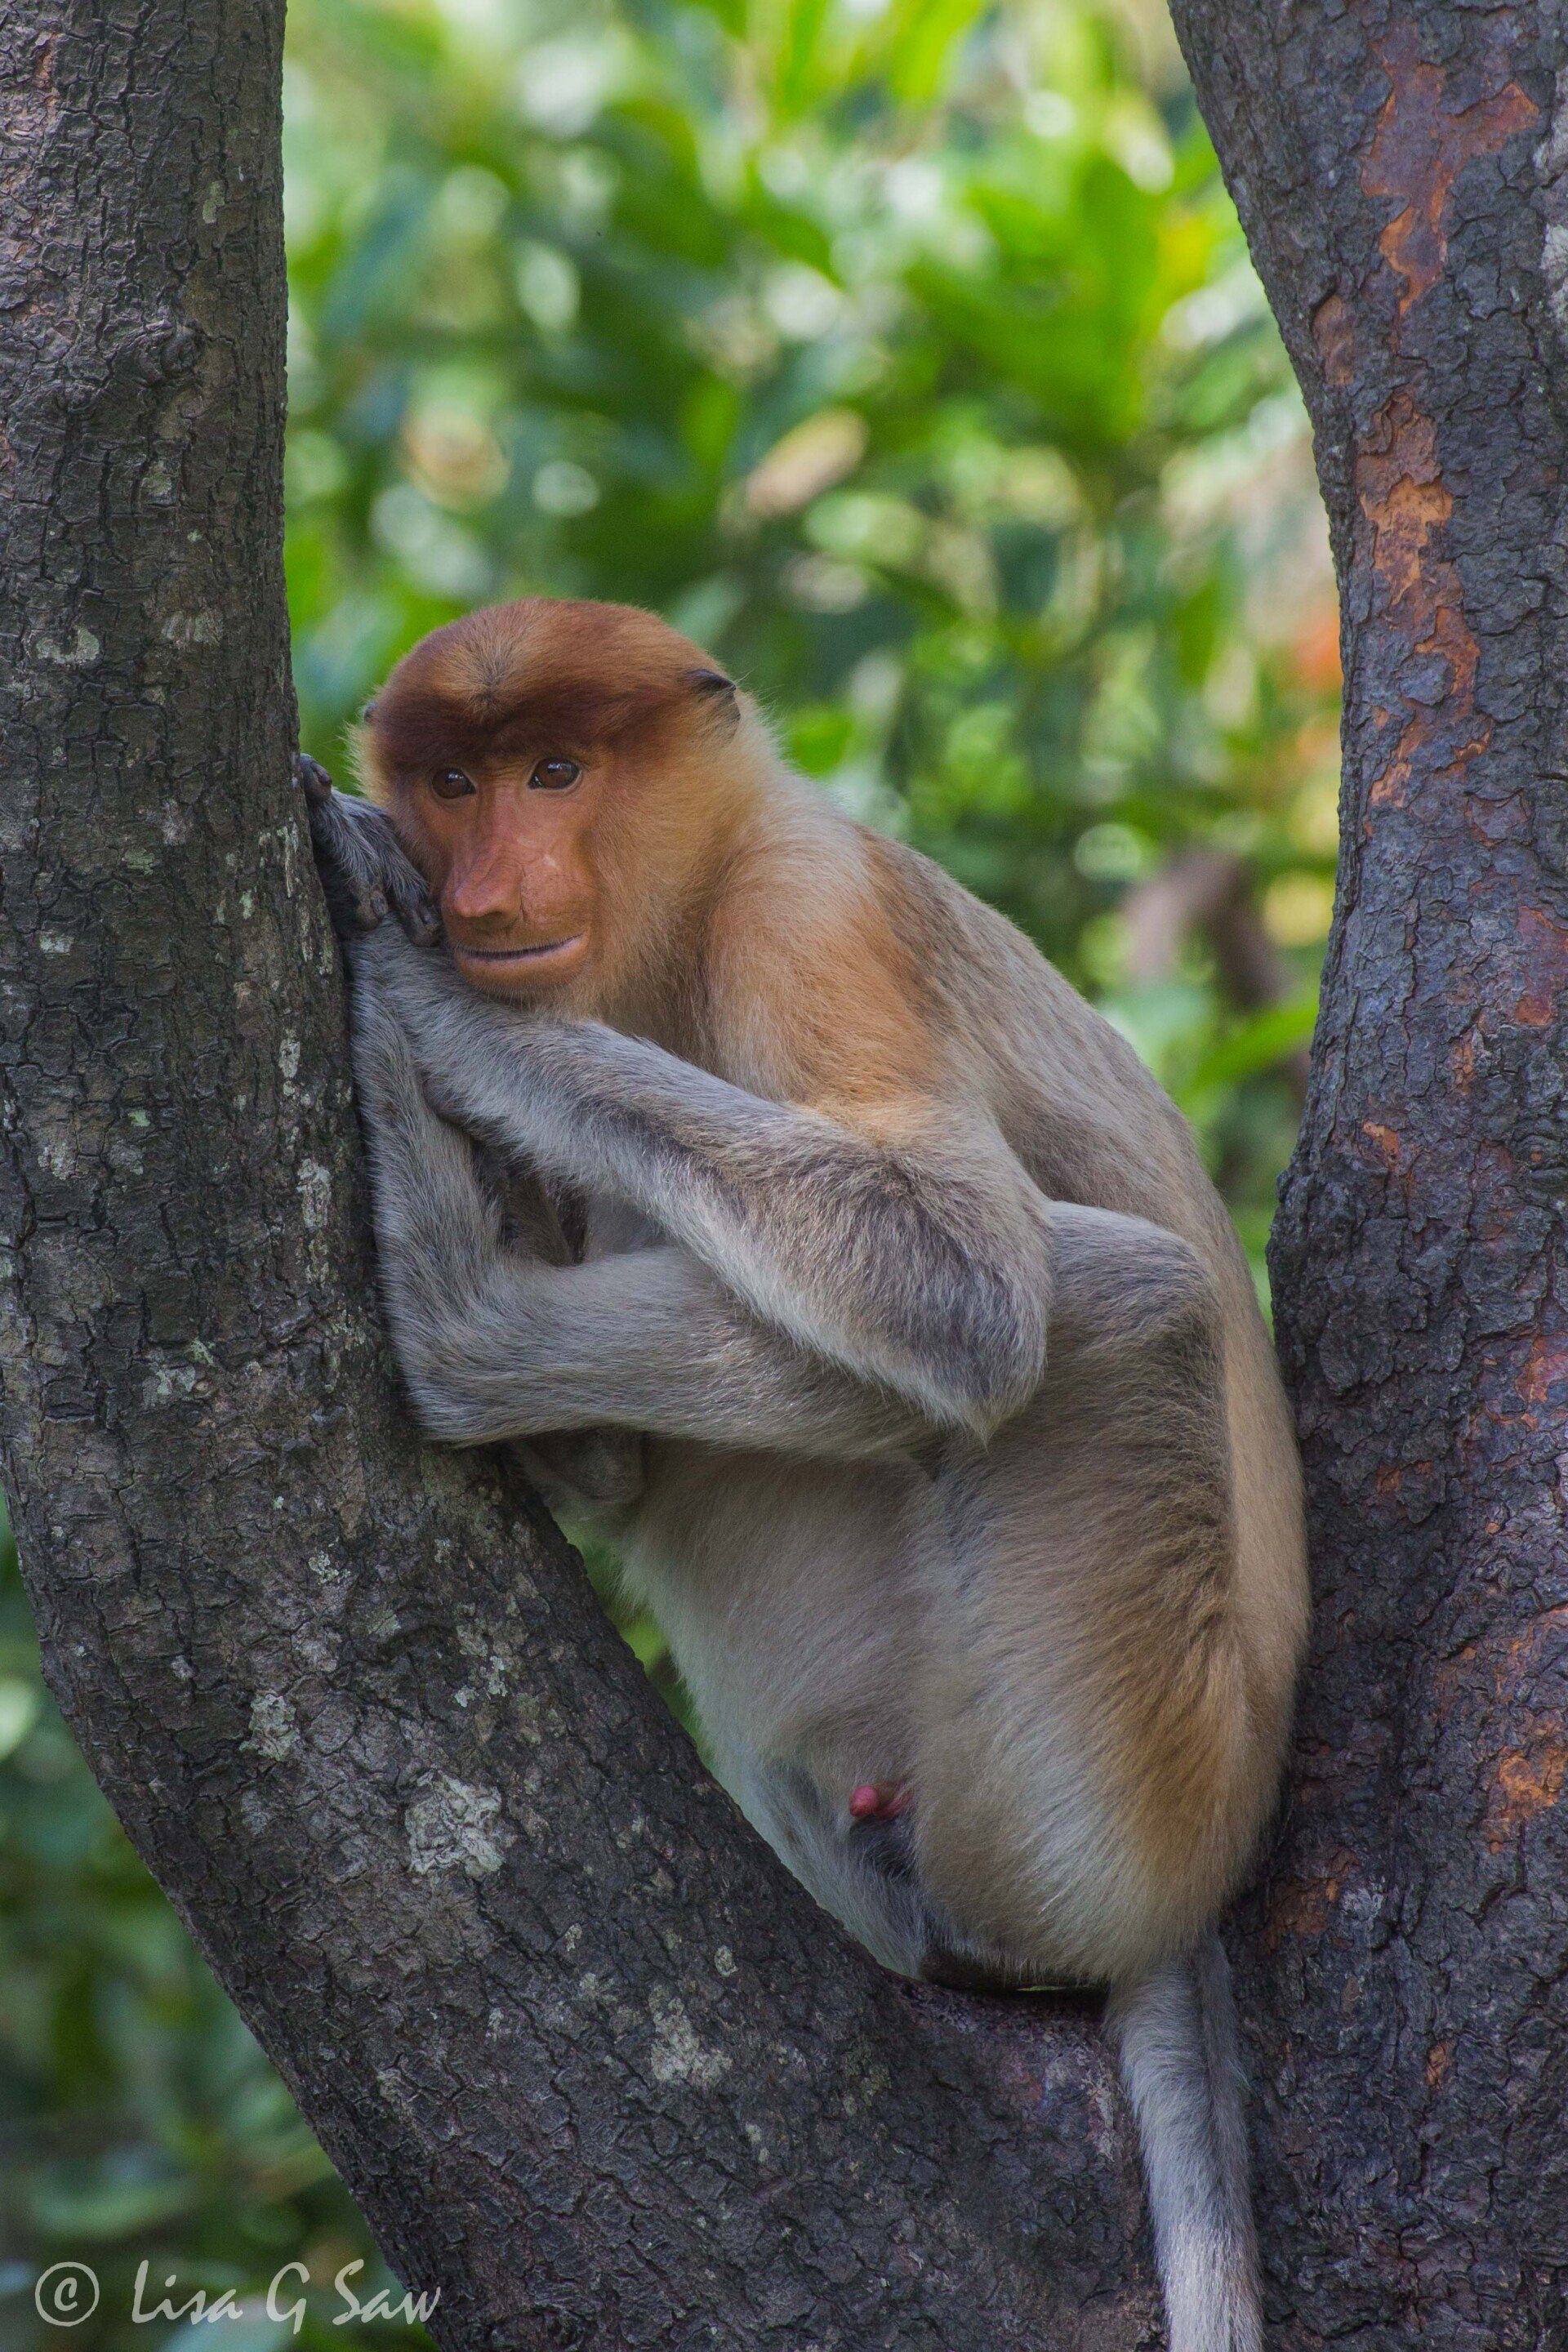 Proboscis Monkey wedged in a tree resting on hands and feet, Labuk Bay